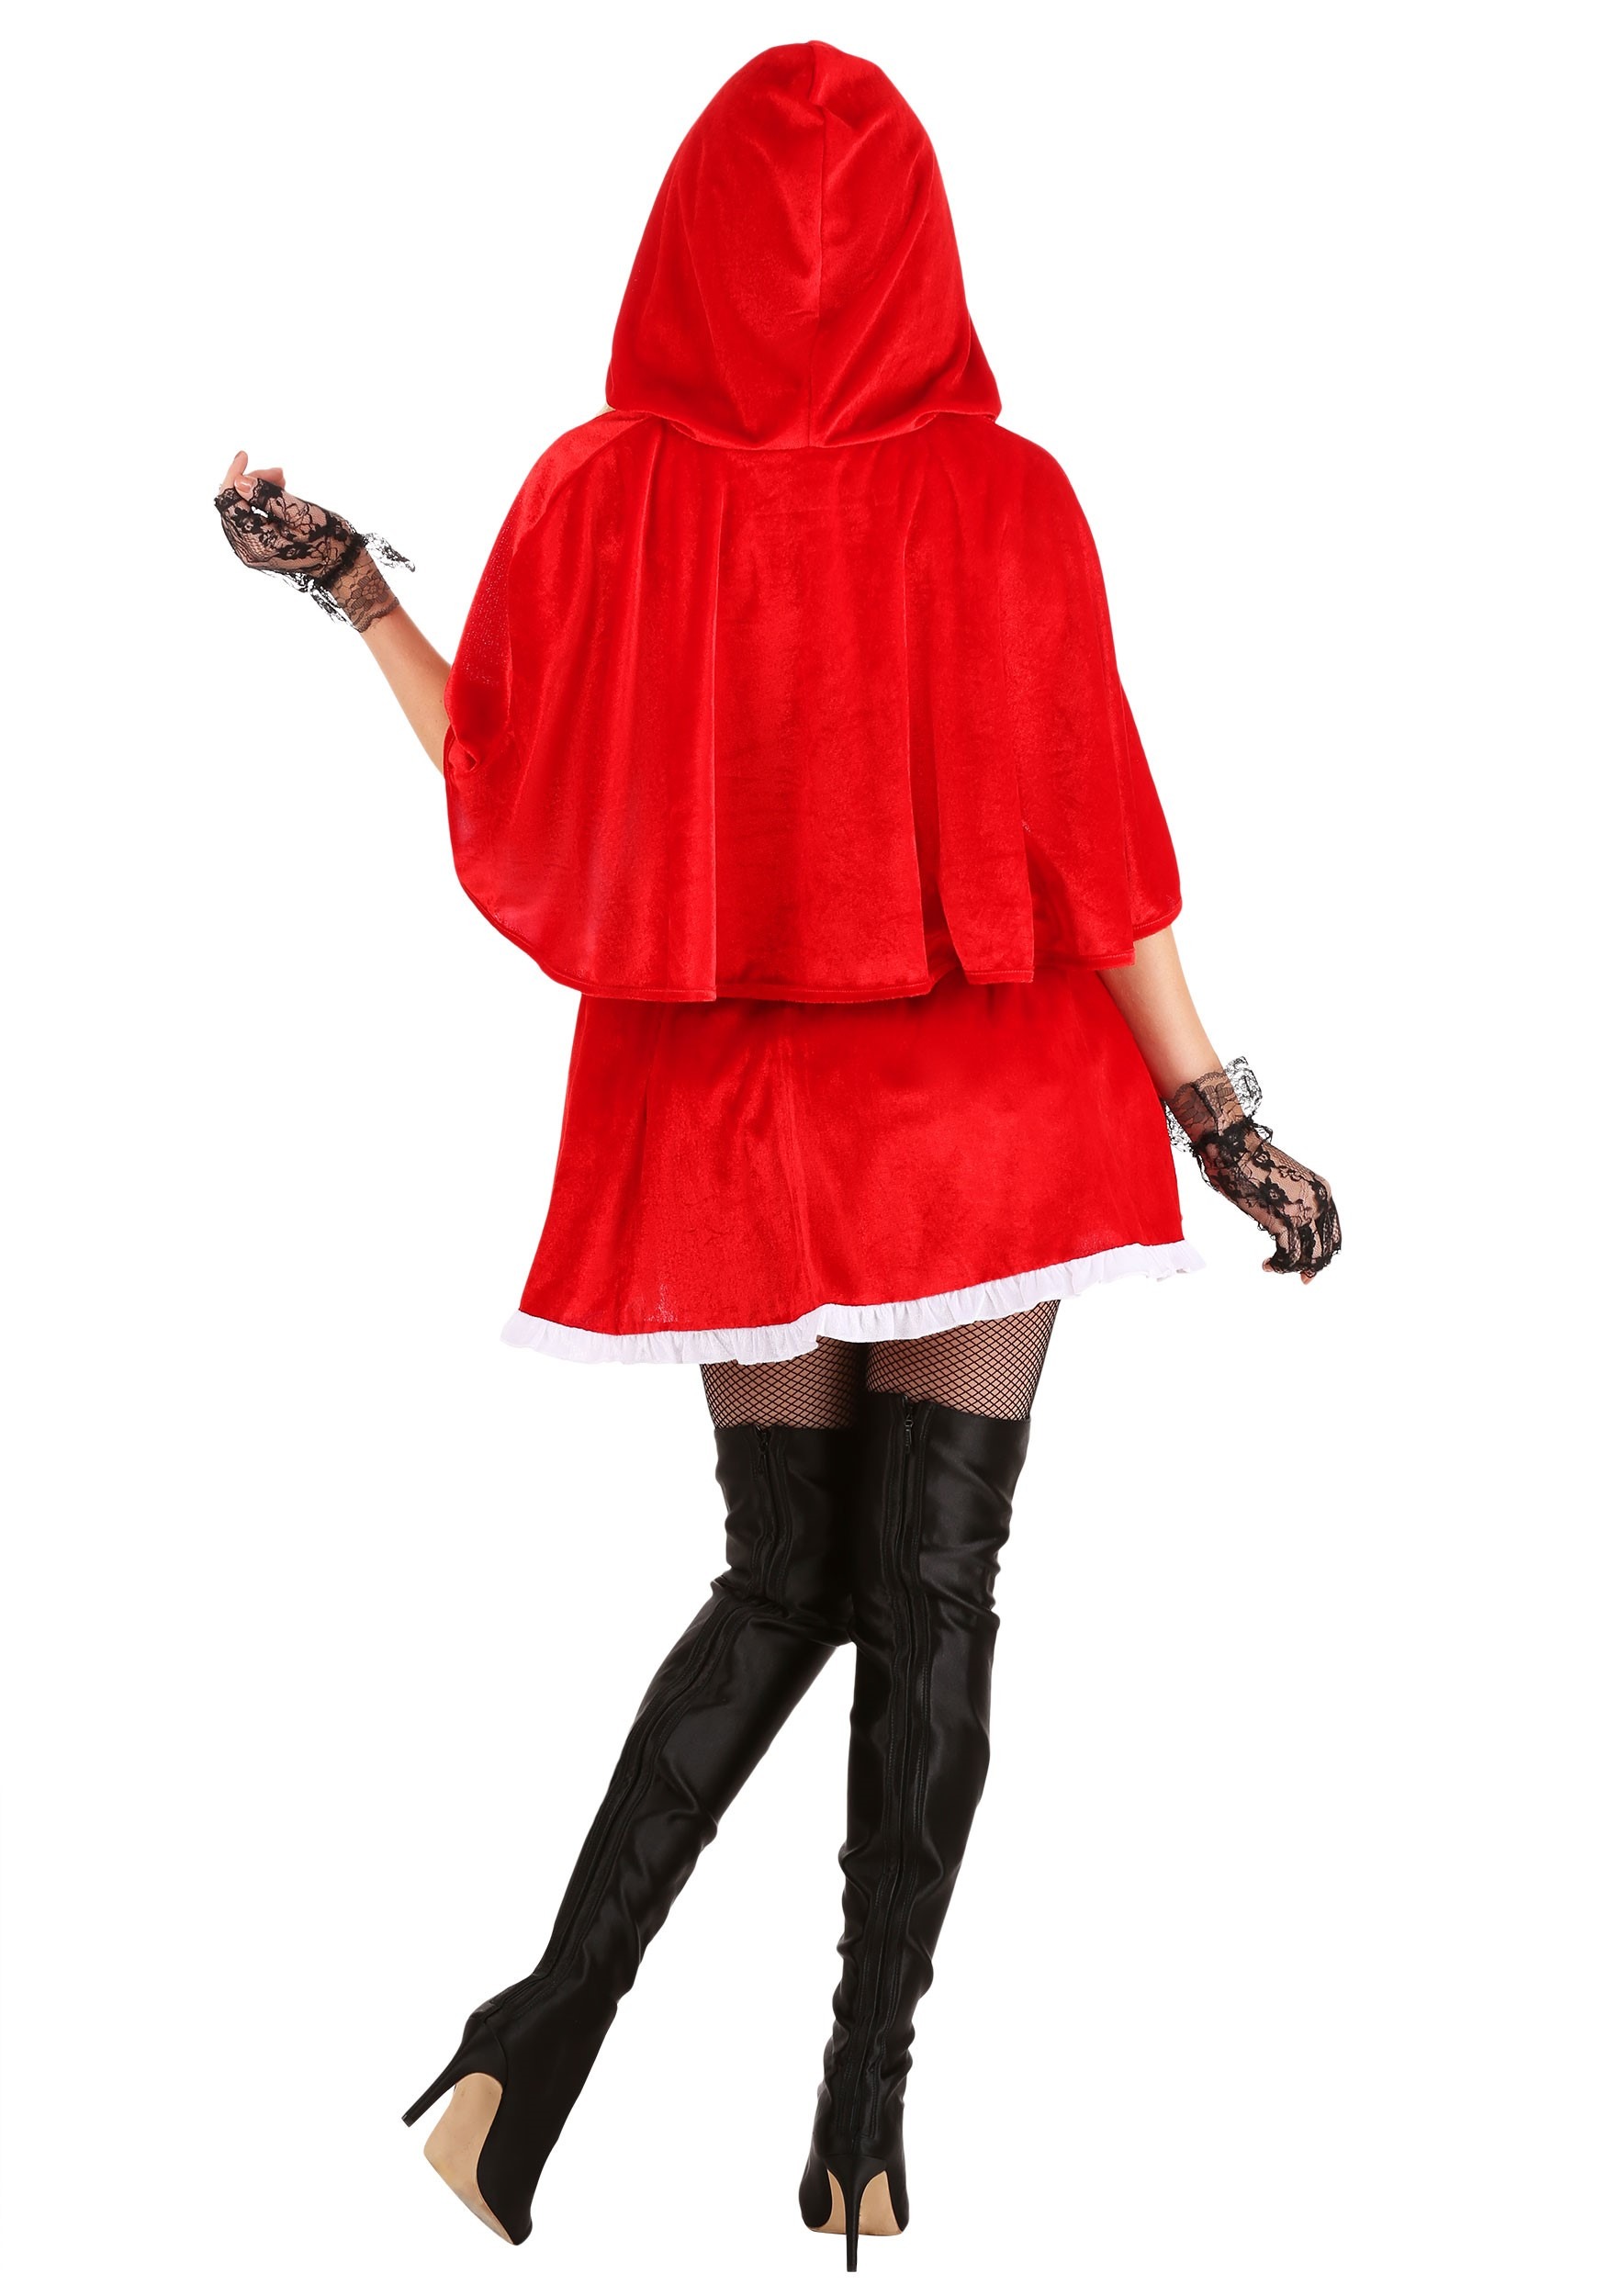 Plus Size Red Hot Riding Hood Fancy Dress Costume For Women